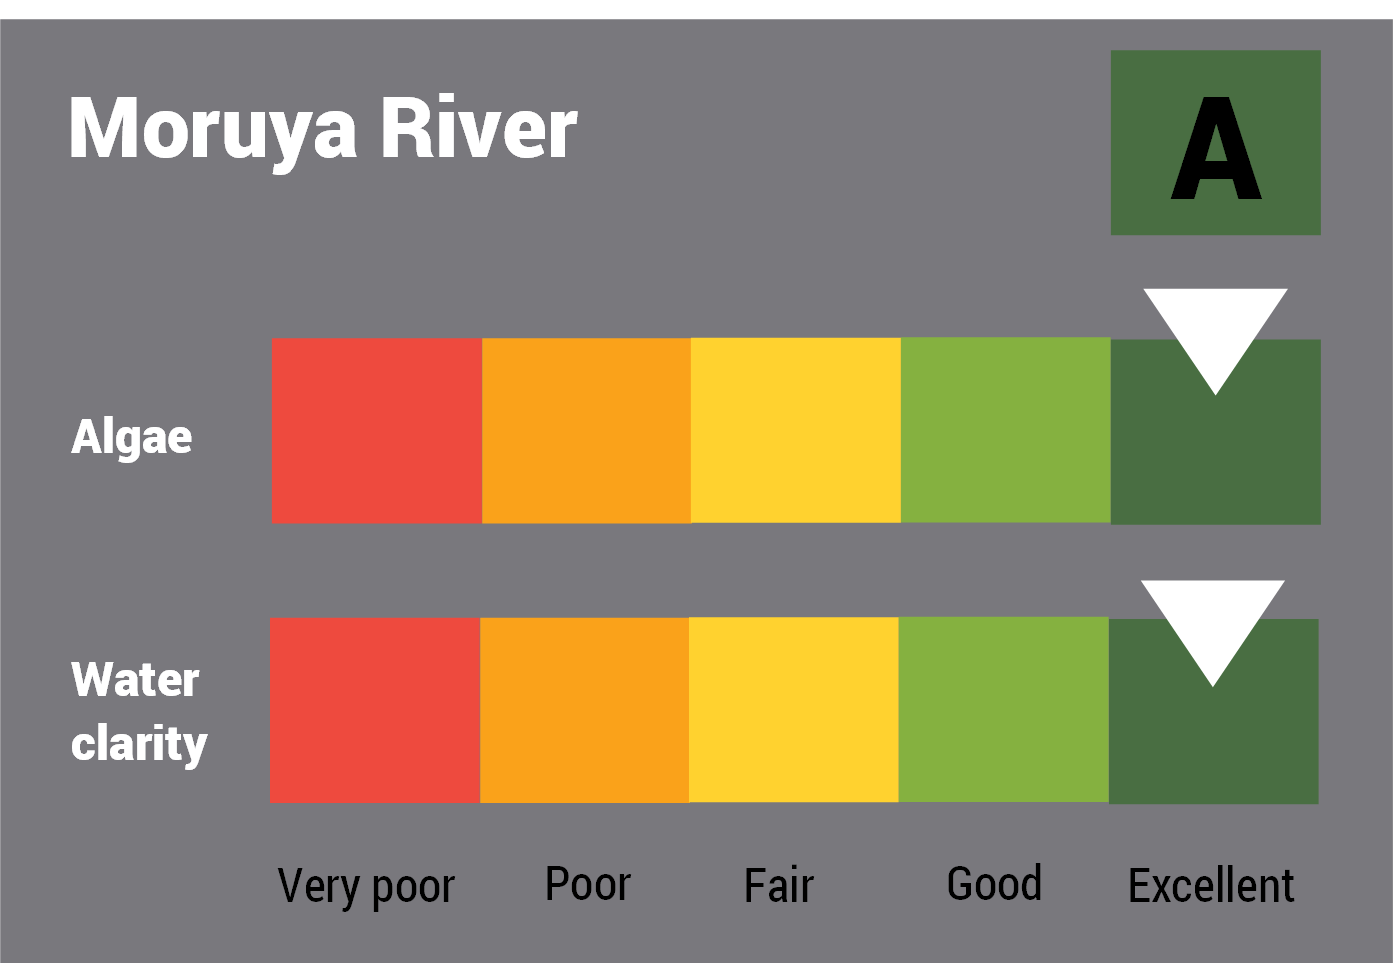 Moruya River water quality report card for algae and water clarity showing colour-coded ratings (red, orange, yellow, light green and dark green, which represent very poor, poor, fair, good and excellent, respectively). Algae is rated 'good' and water clarity is rated 'excellent' giving an overall rating of 'good' or 'B'.